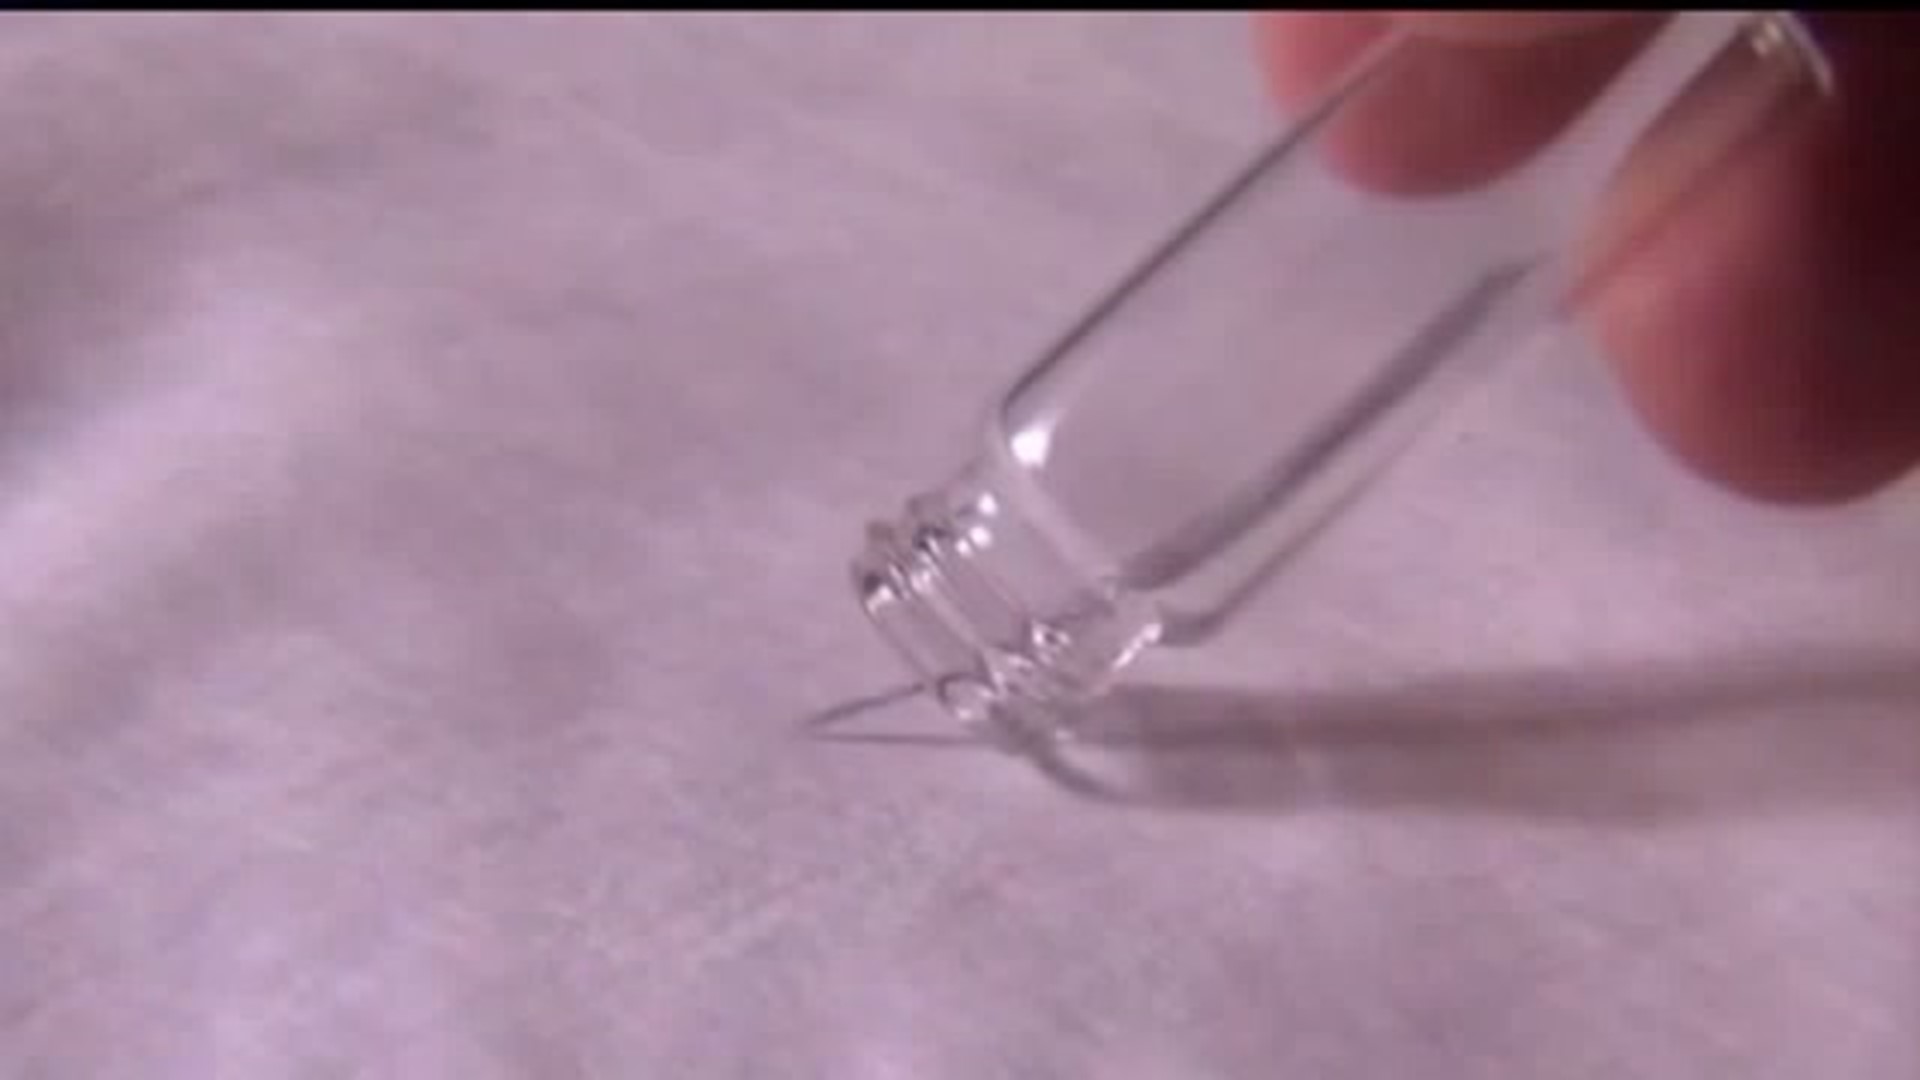 Local woman says FDA reporting system faulty after finding discrepancies with Essure reports of fetal deaths